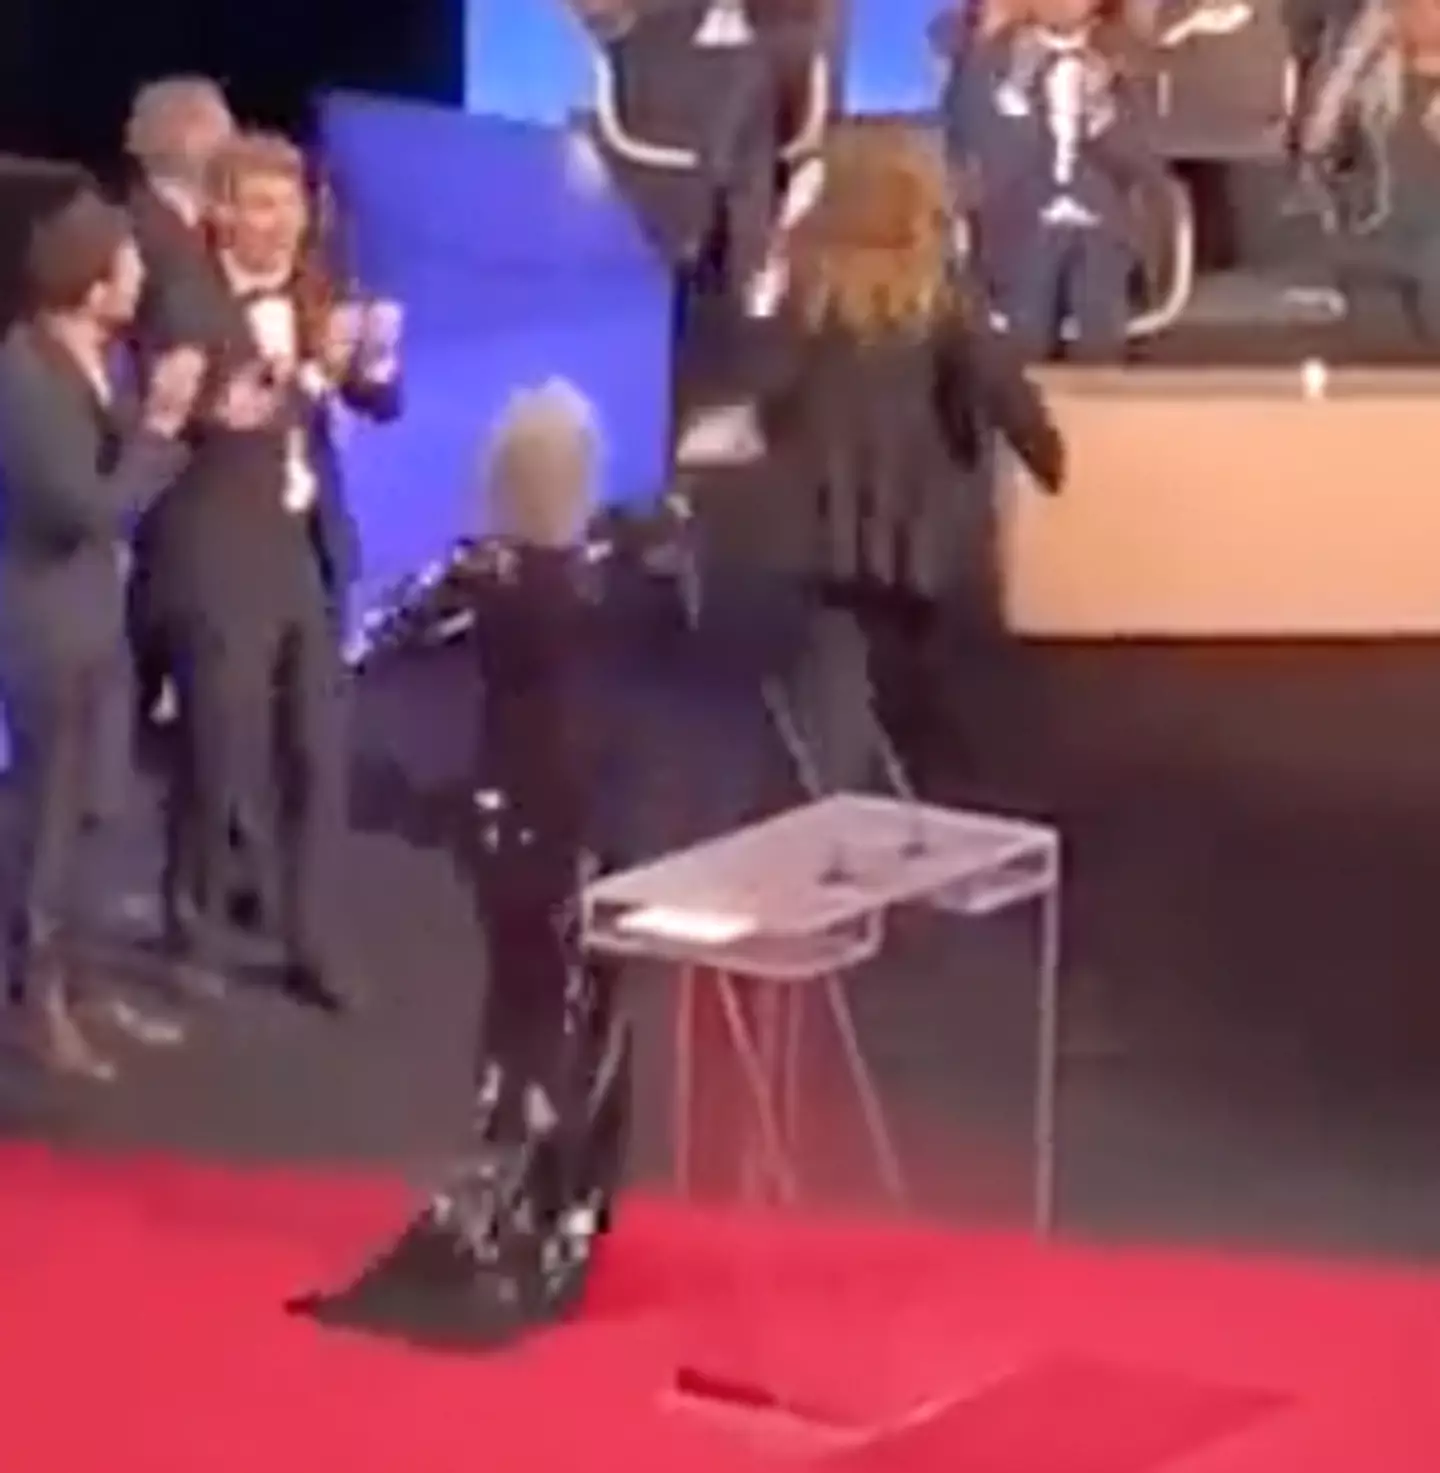 Jane Fonda presented the coveted Palme d’Or to Justine Triet on the final day of the Cannes Film Festival - before throwing it at her.